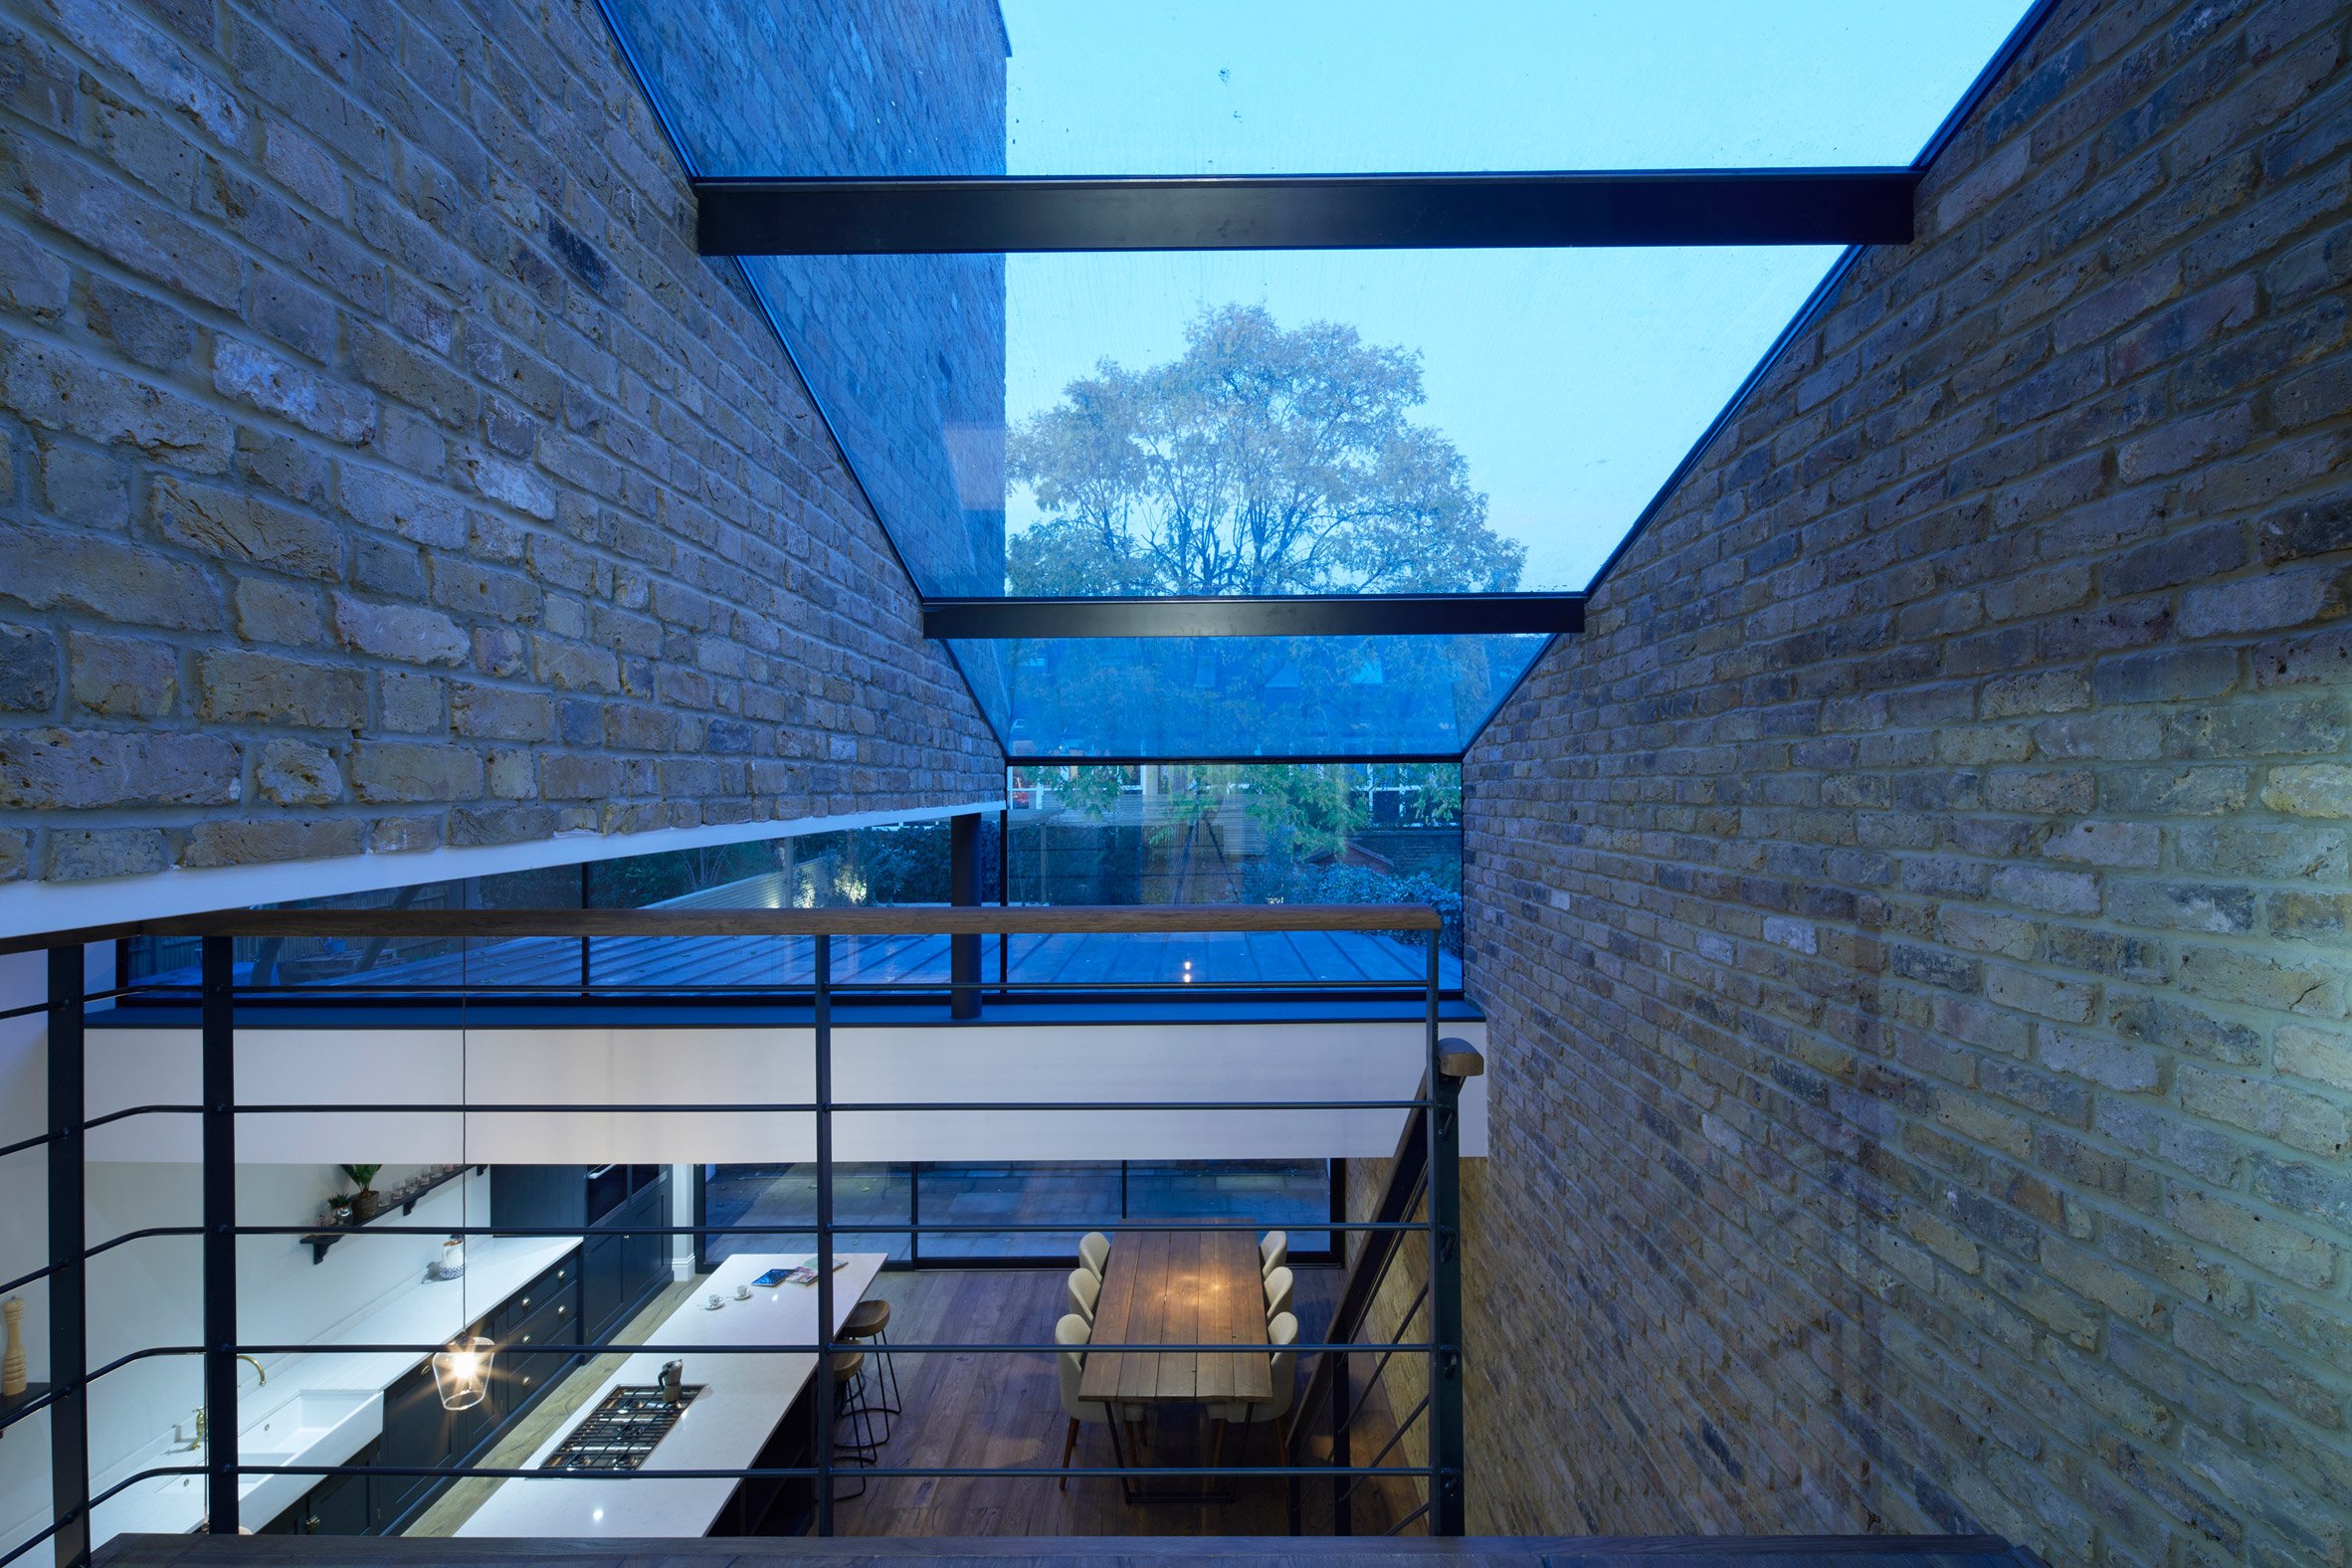 Felsham Road by Giles Pike Architects